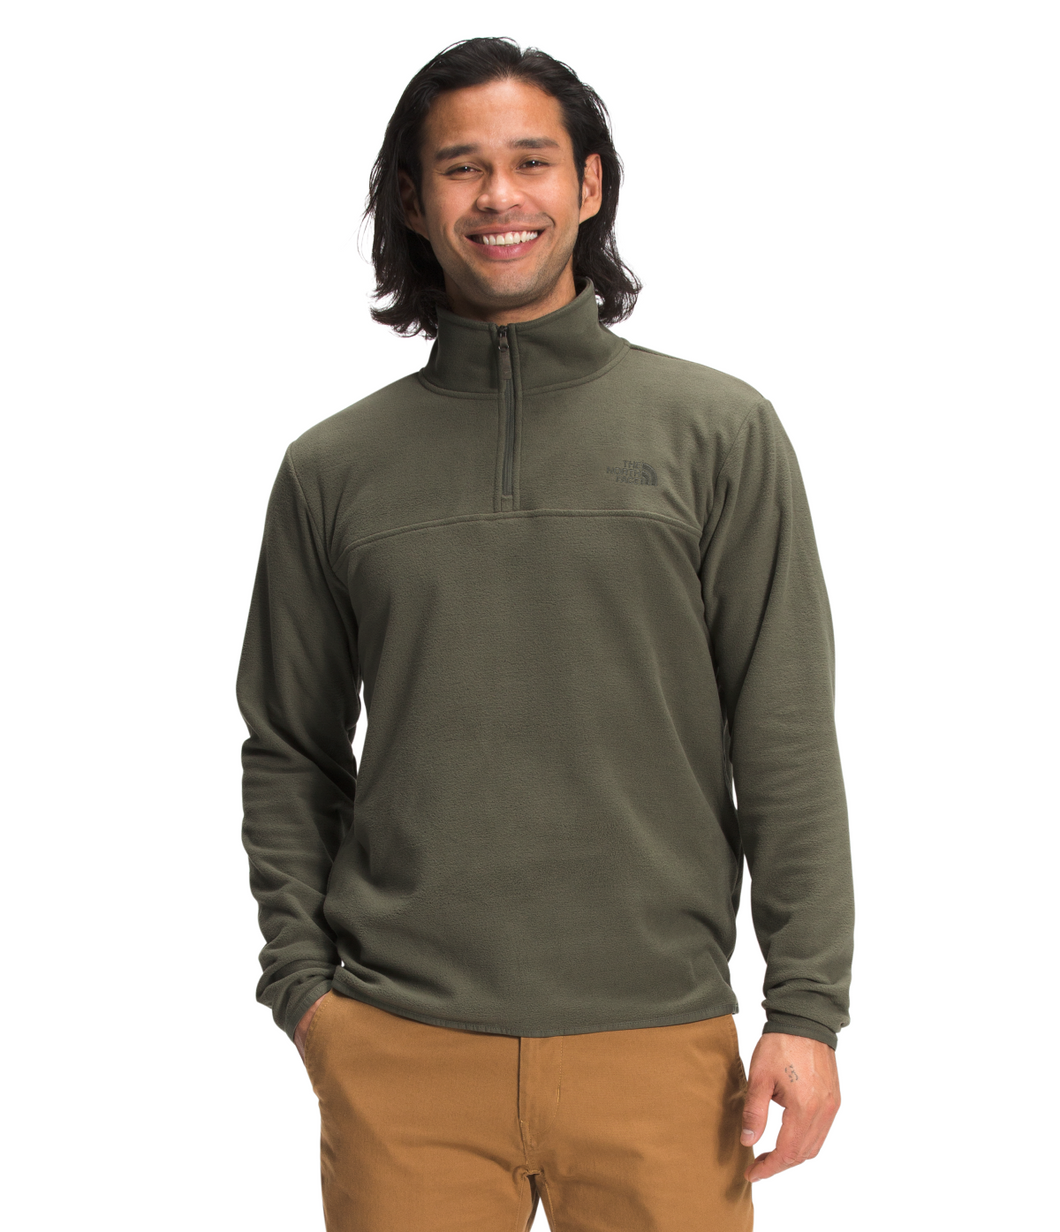 'The North Face' Men's TKA Glacier 1/4 Zip - Taupe Green